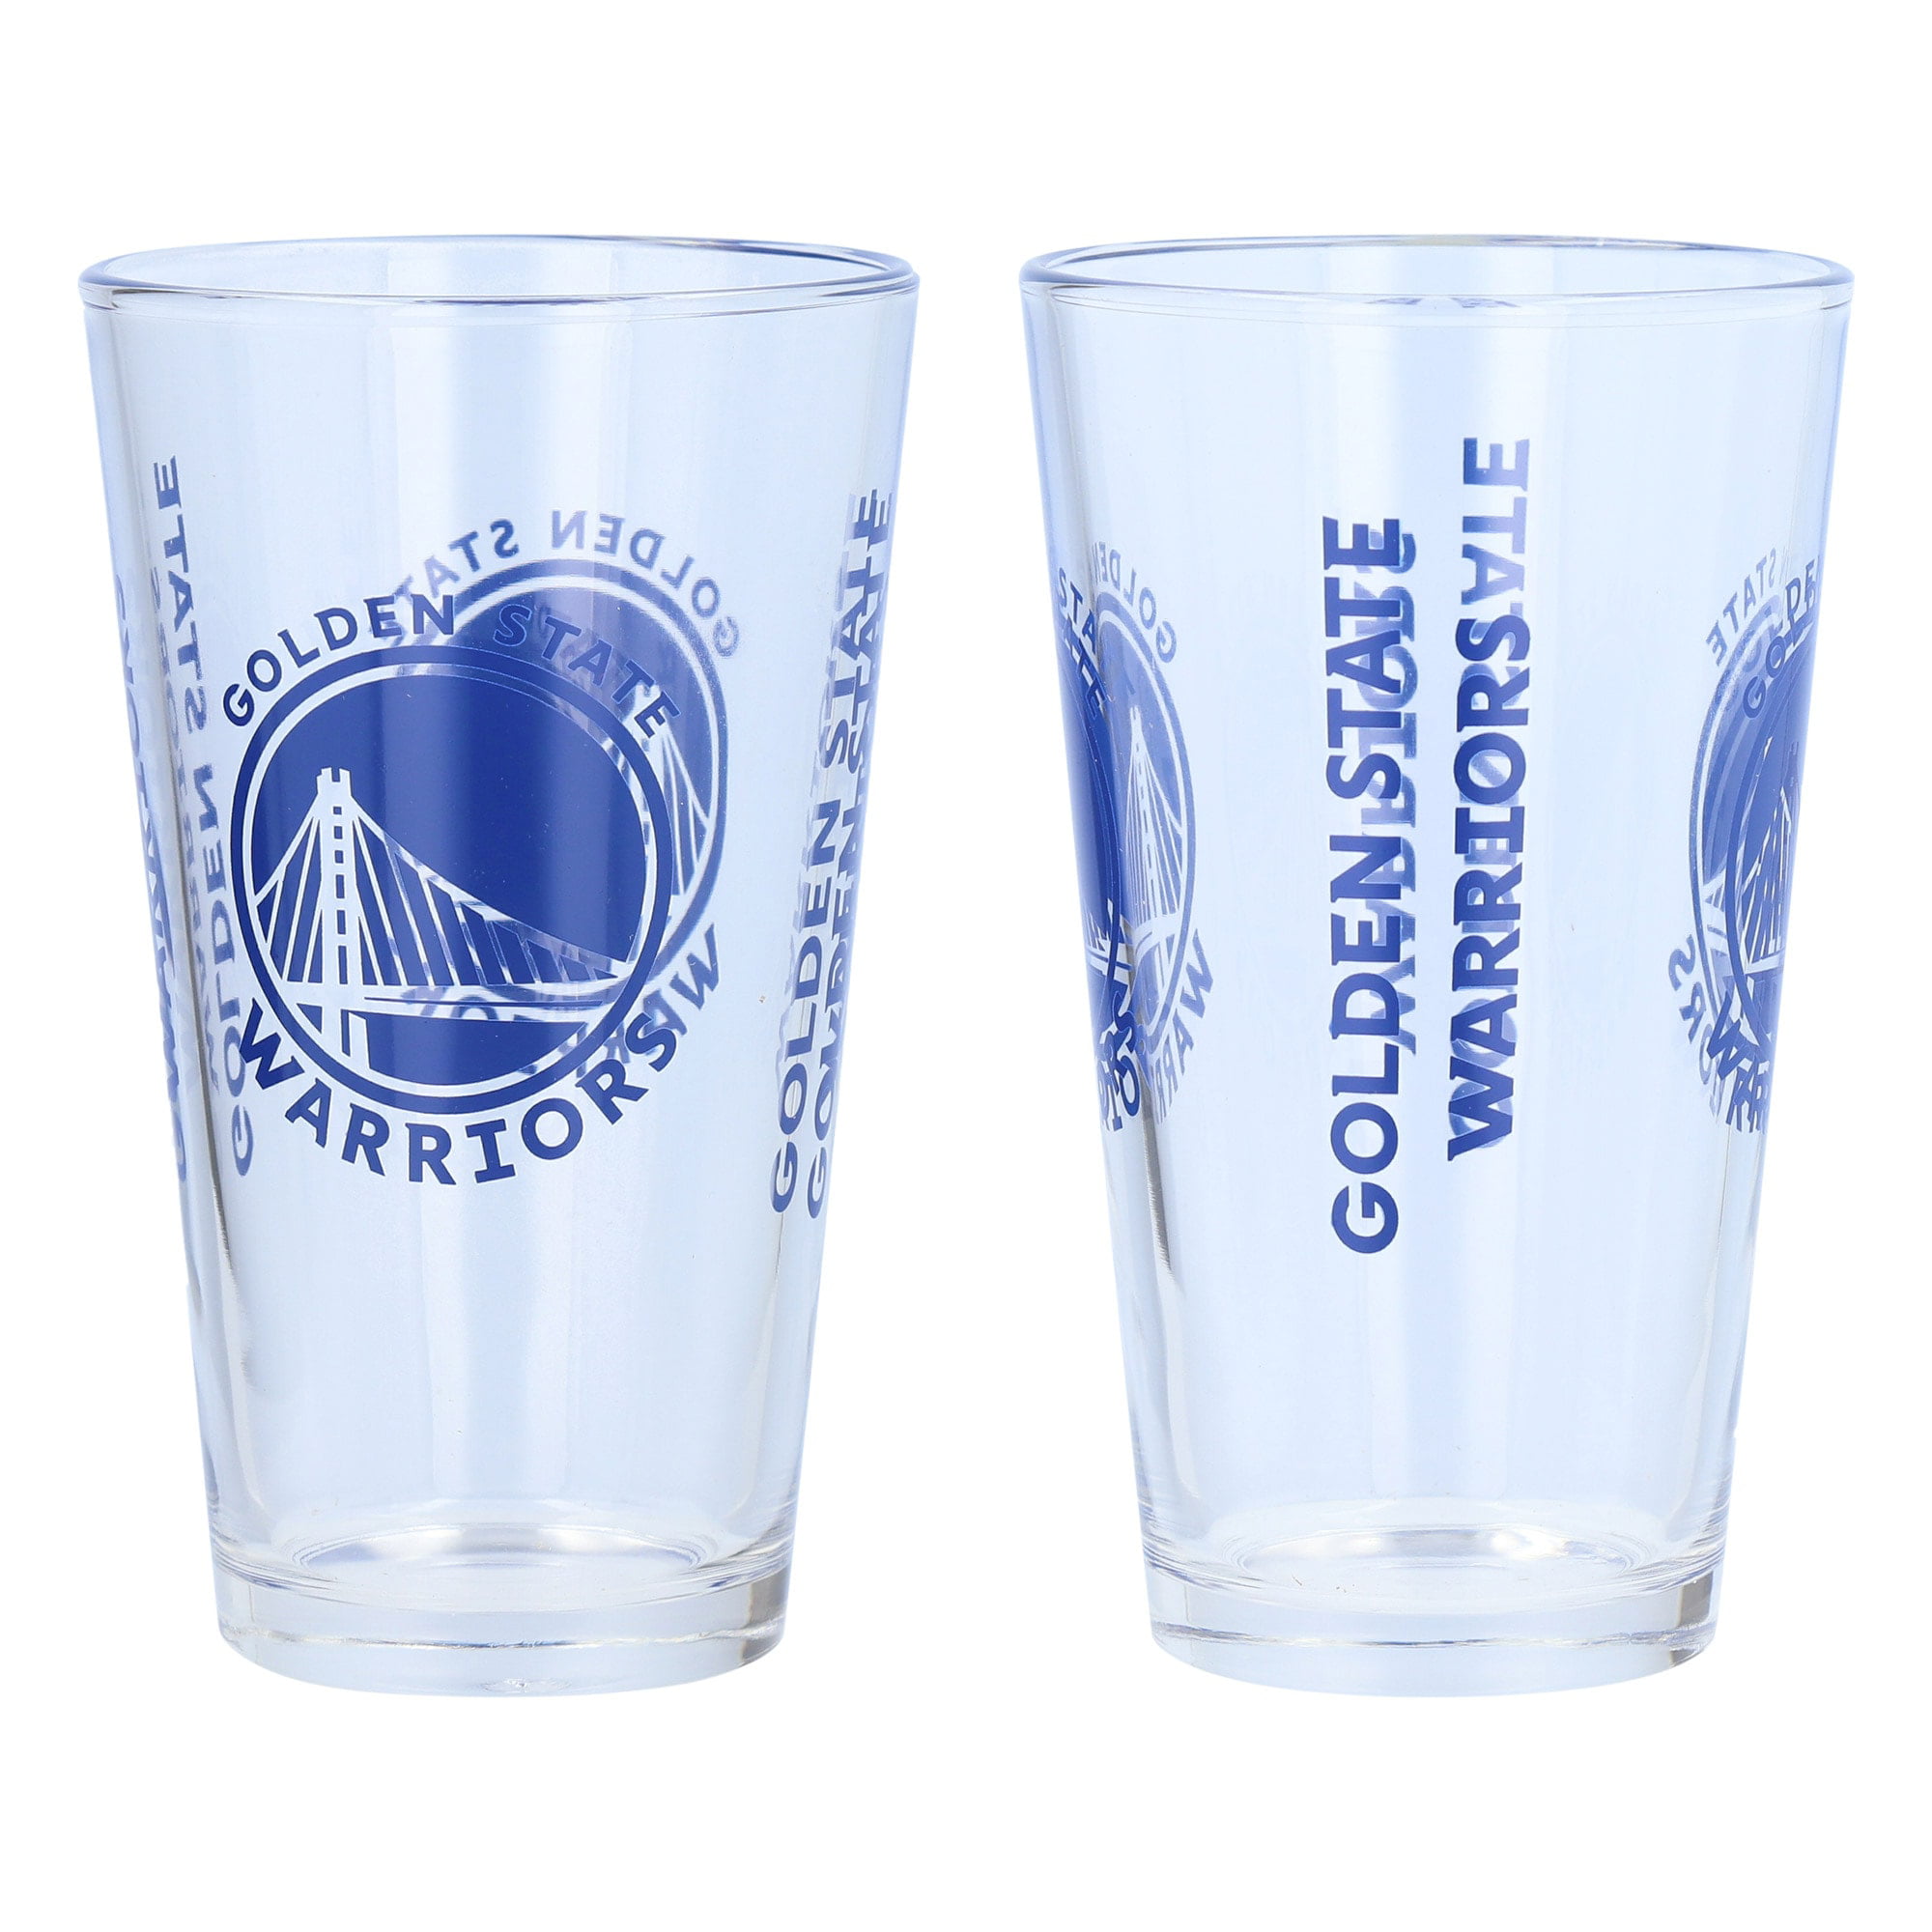 Lot of 2 NEW Bud Light Golden State Warriors Pint Glasses BEER Champions 